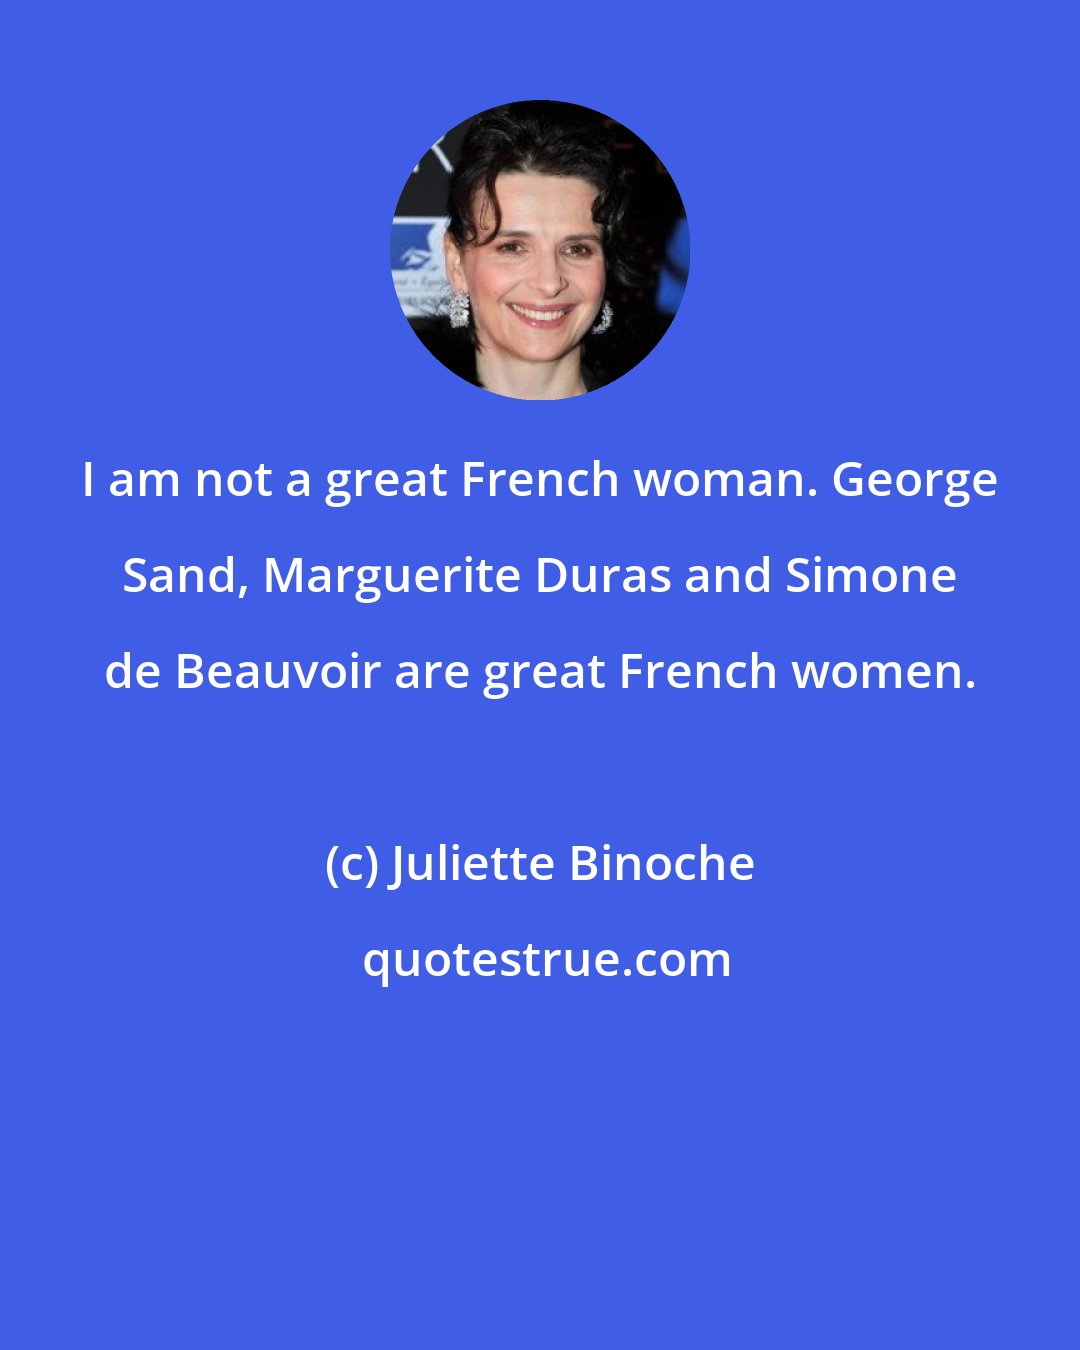 Juliette Binoche: I am not a great French woman. George Sand, Marguerite Duras and Simone de Beauvoir are great French women.